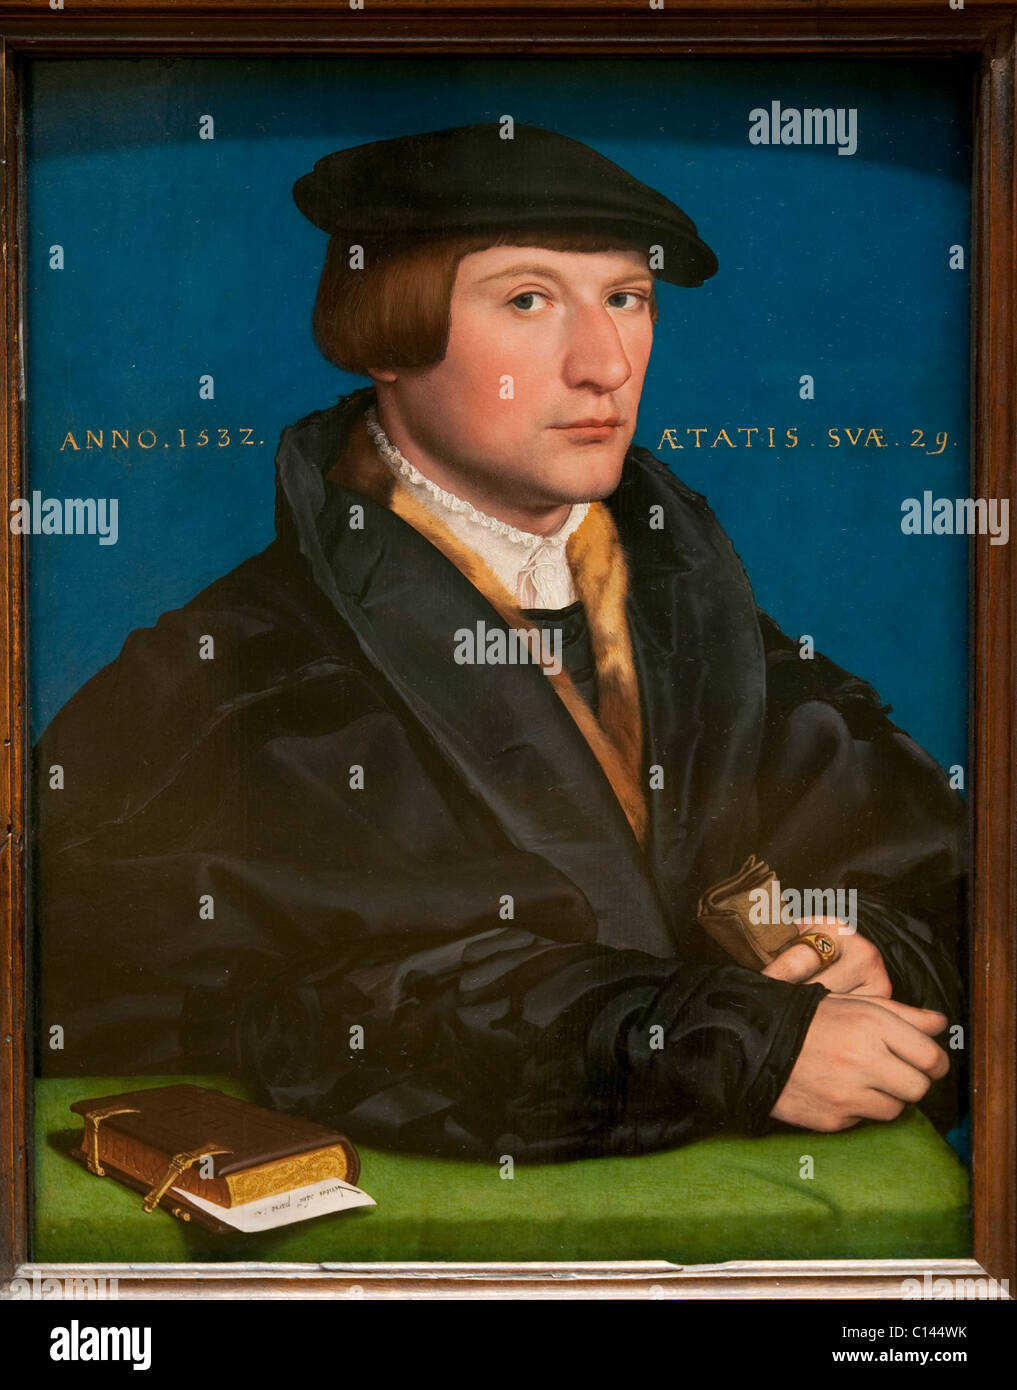 Portrait of a Member of the Wedigh Family, Probably Hermann Wedigh (died 1560), 1532, by Hans Holbein the Younger, Stock Photo